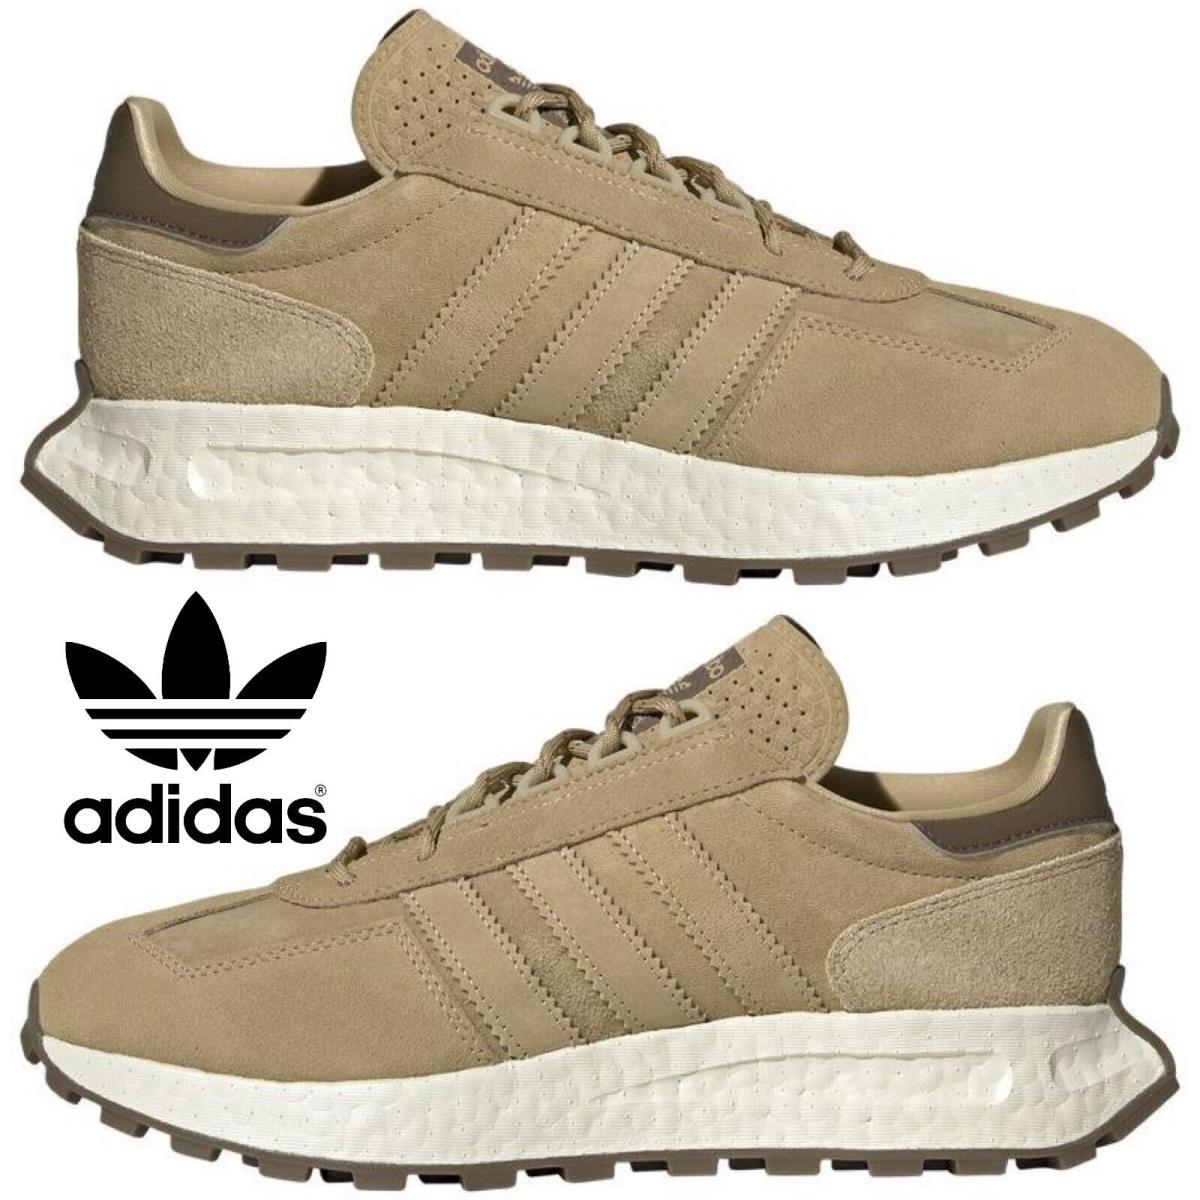 Adidas Retropy E5 Men`s Sneakers Running Shoes Gym Casual Sport Beige Brown - Beige, Manufacturer: